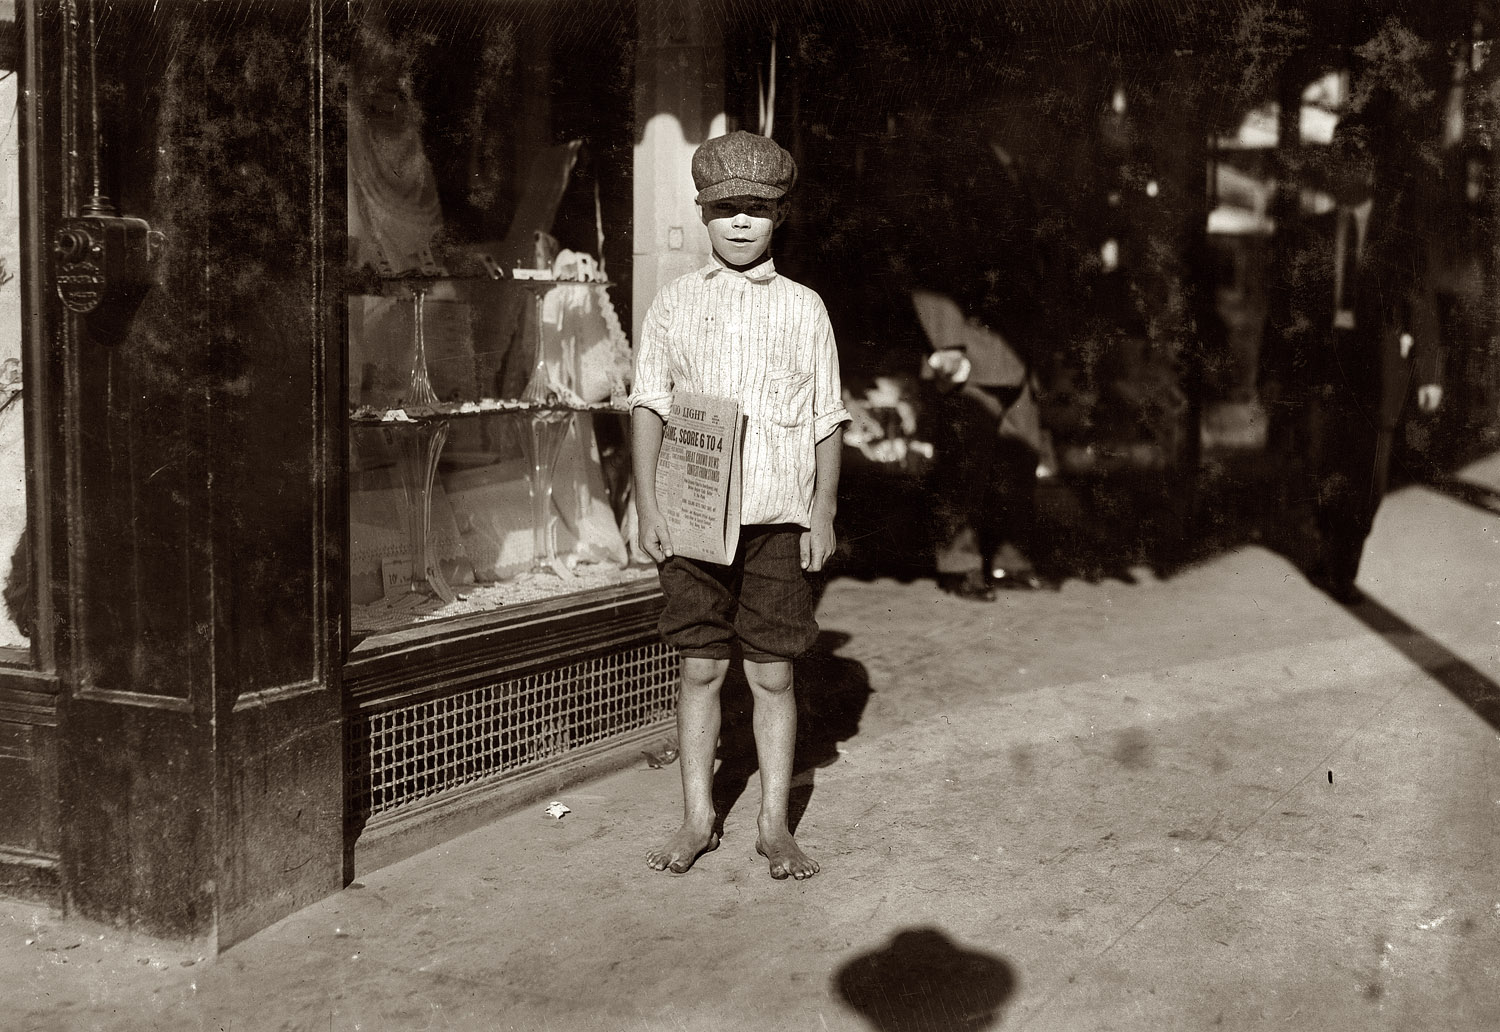 October 1913. San Antonio, Texas. "Lionel Perry, 9-year-old newsboy. Starts out at 5 a.m. usually, 4 a.m. on Sundays. Sells after school." View full size. Photo and caption by Lewis Wickes Hine for the National Child Labor Committee.